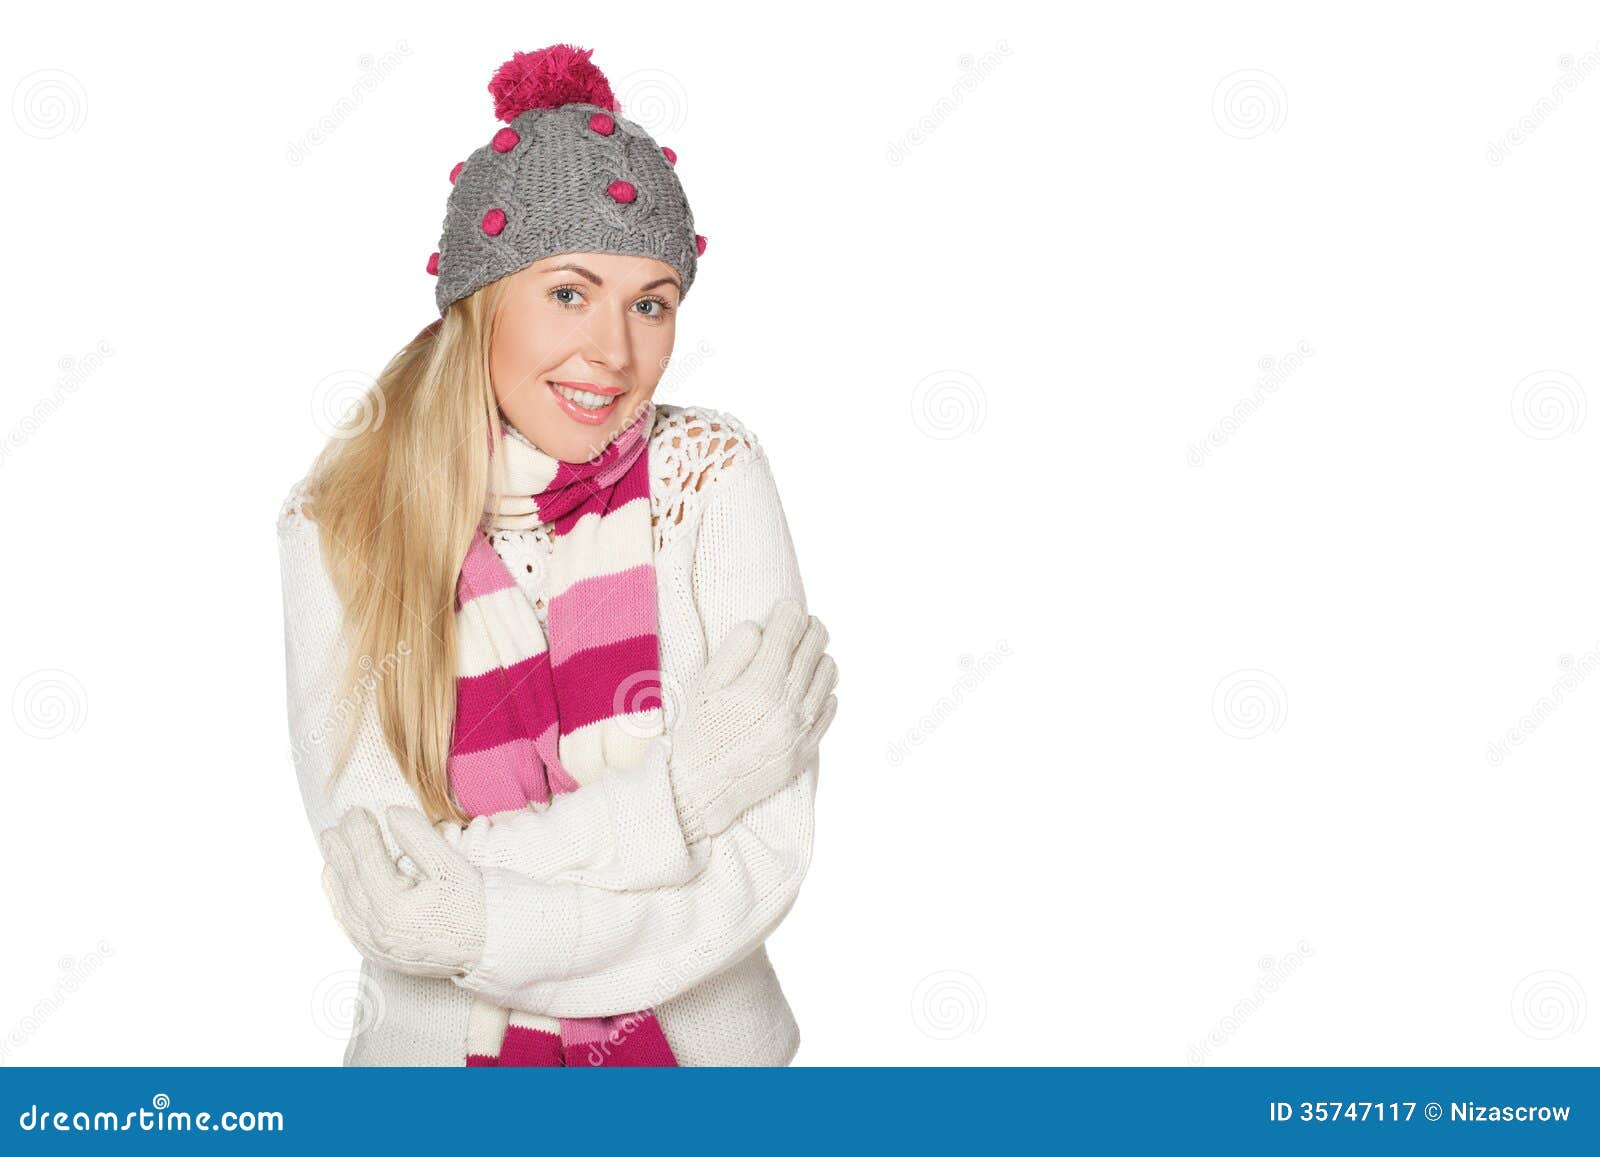 Young Girl In Sweater, Hat, Scarf And Mittens. Royalty Free Stock ...